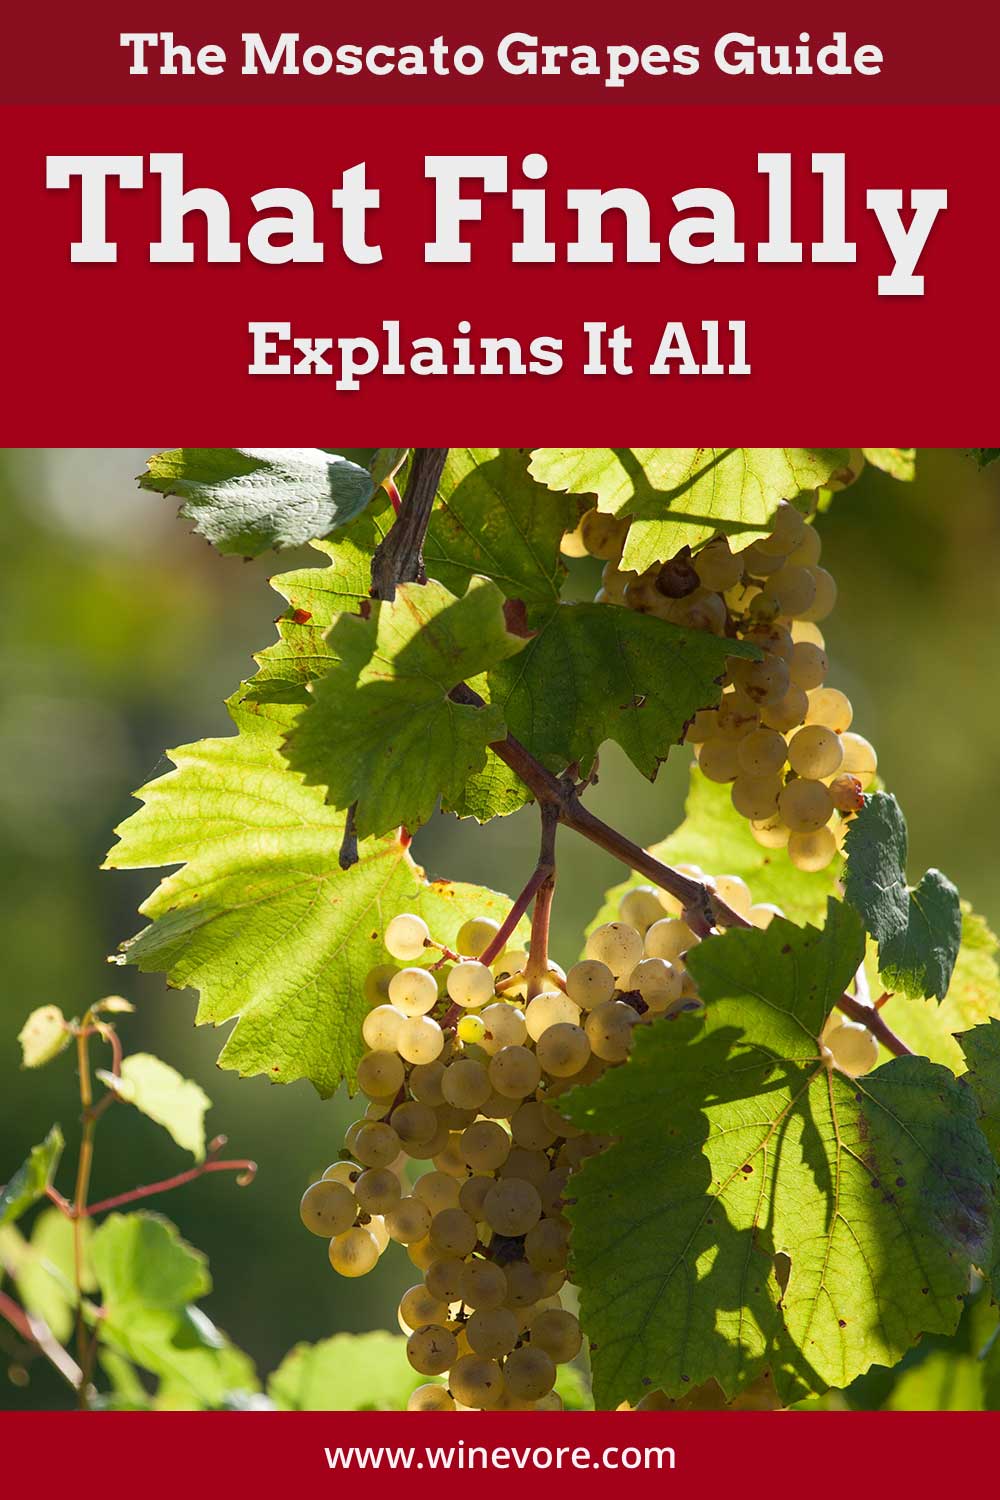 A bunch of grapes on a tree - Moscato Grapes Guide.